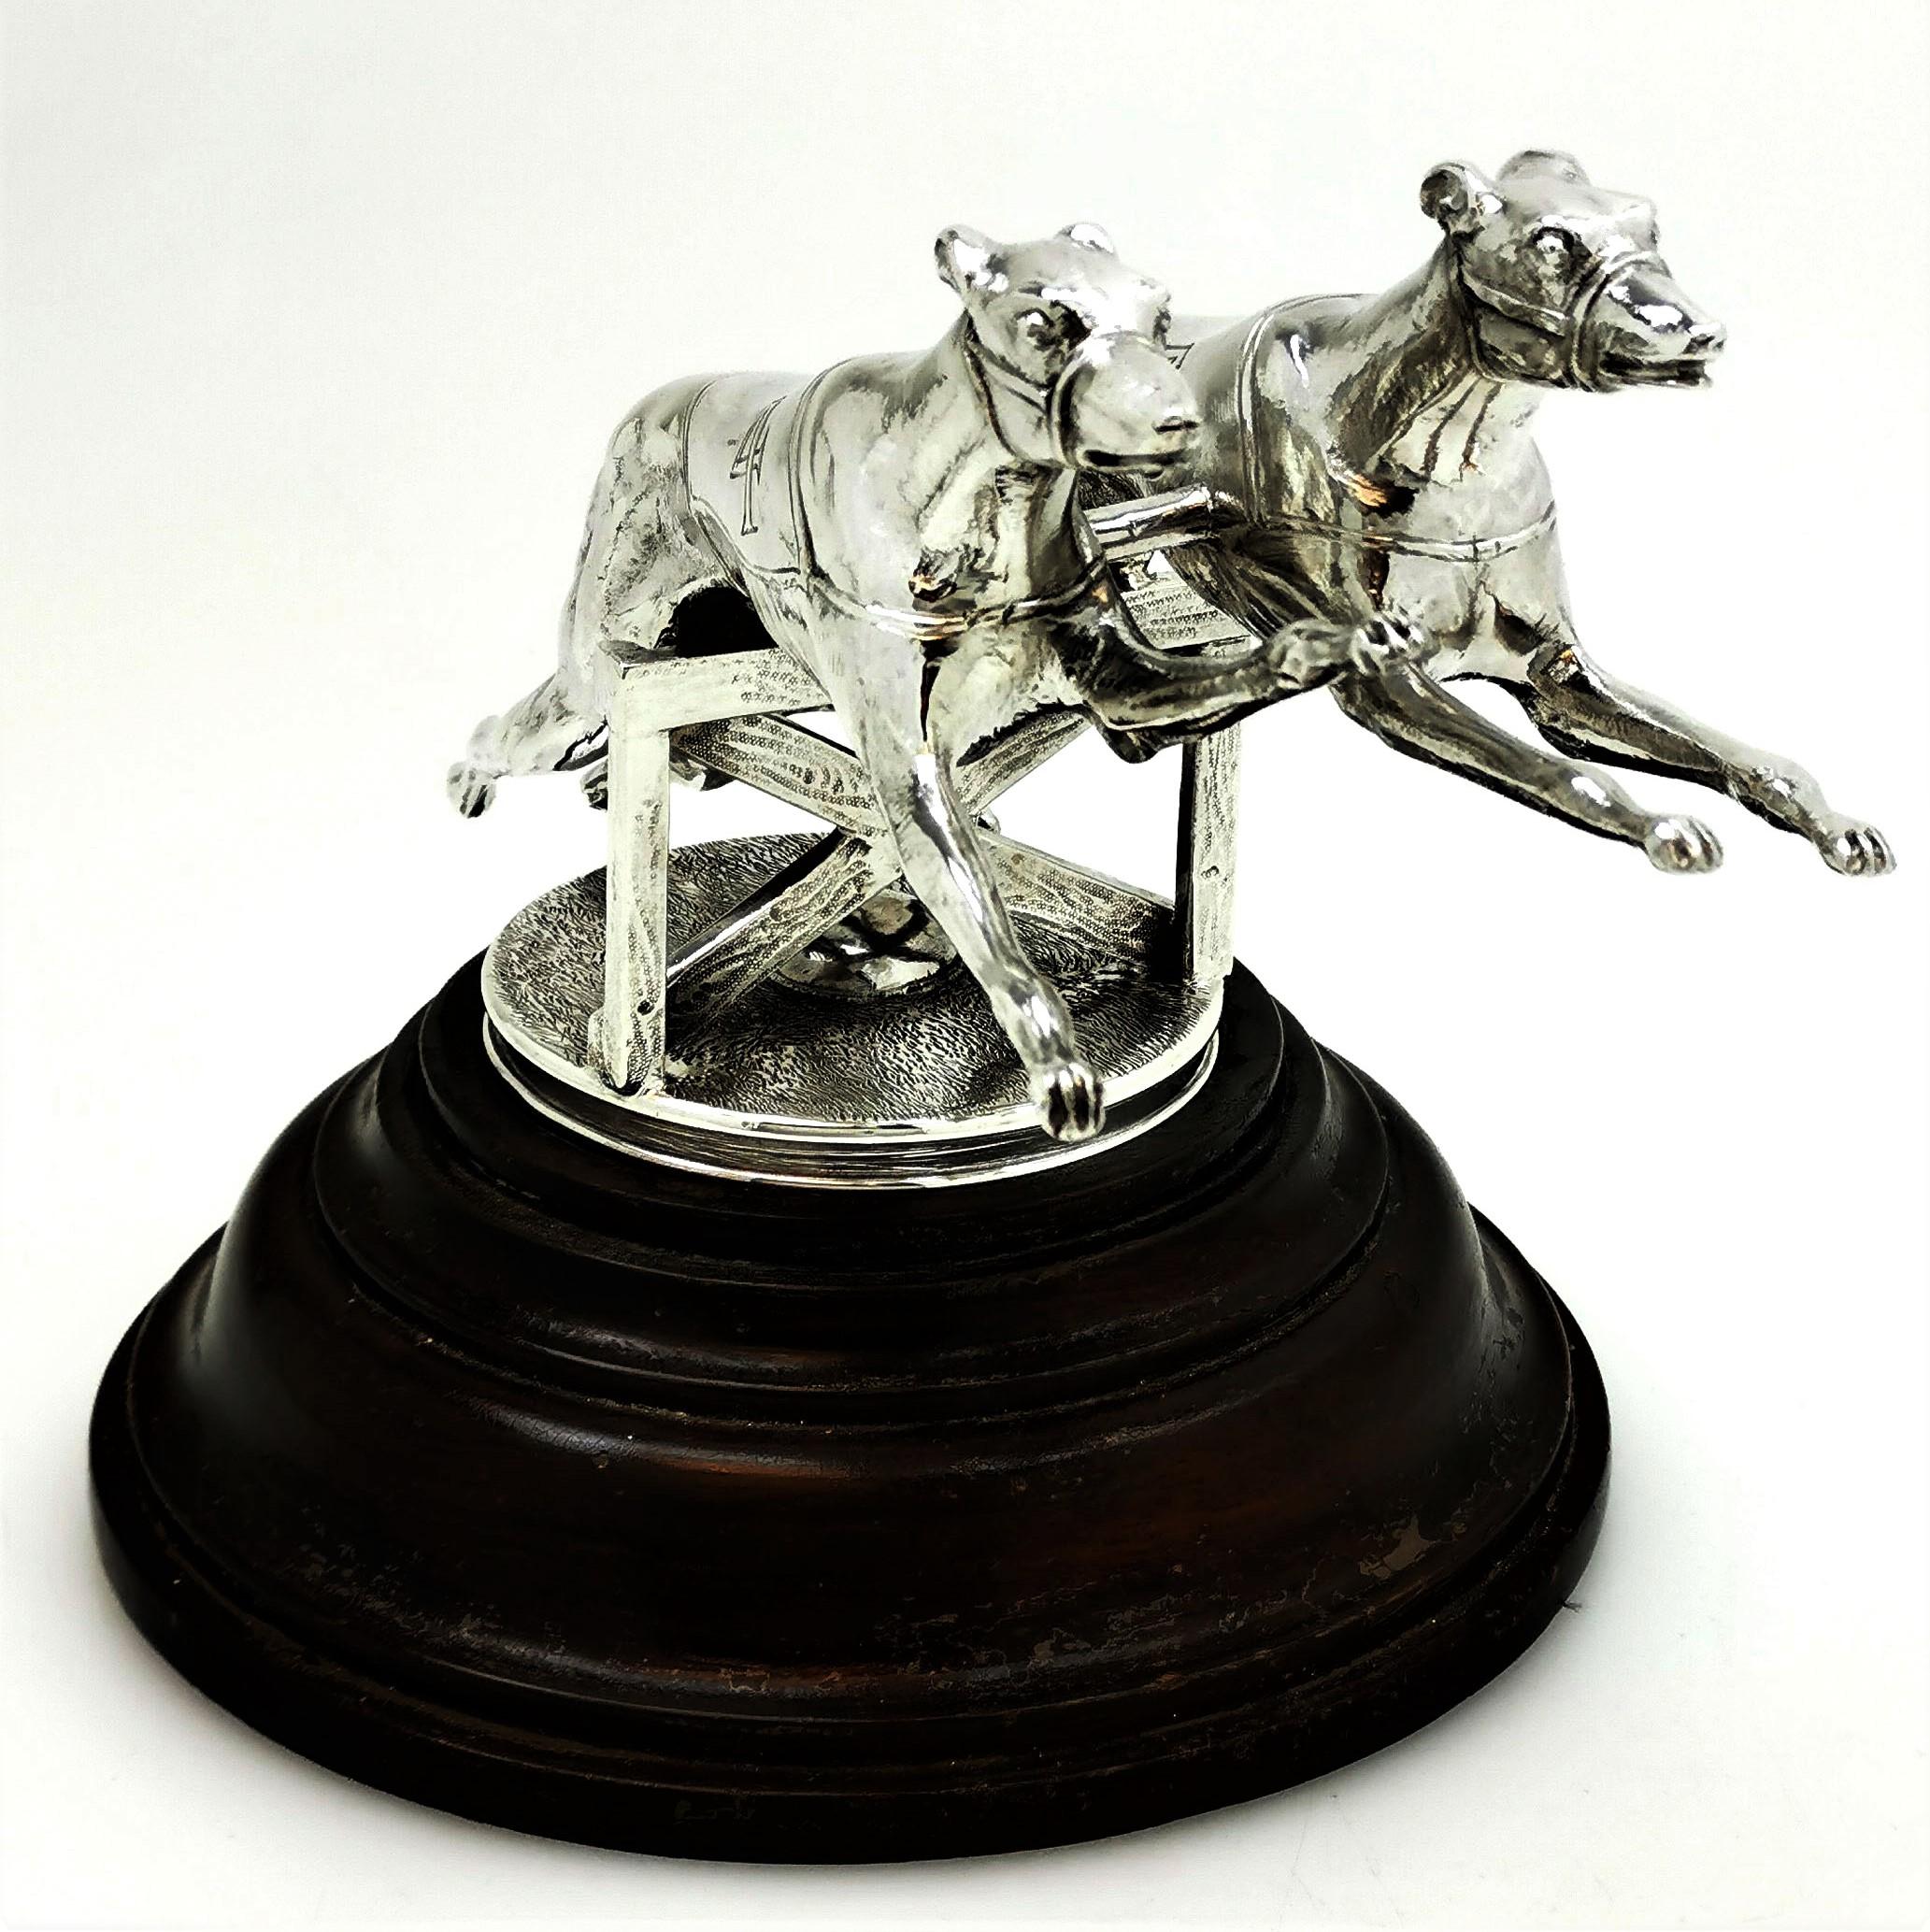 Scottish Pair of Greyhound Dogs on Plinth Sterling Silver Model Statue Figures, 1927